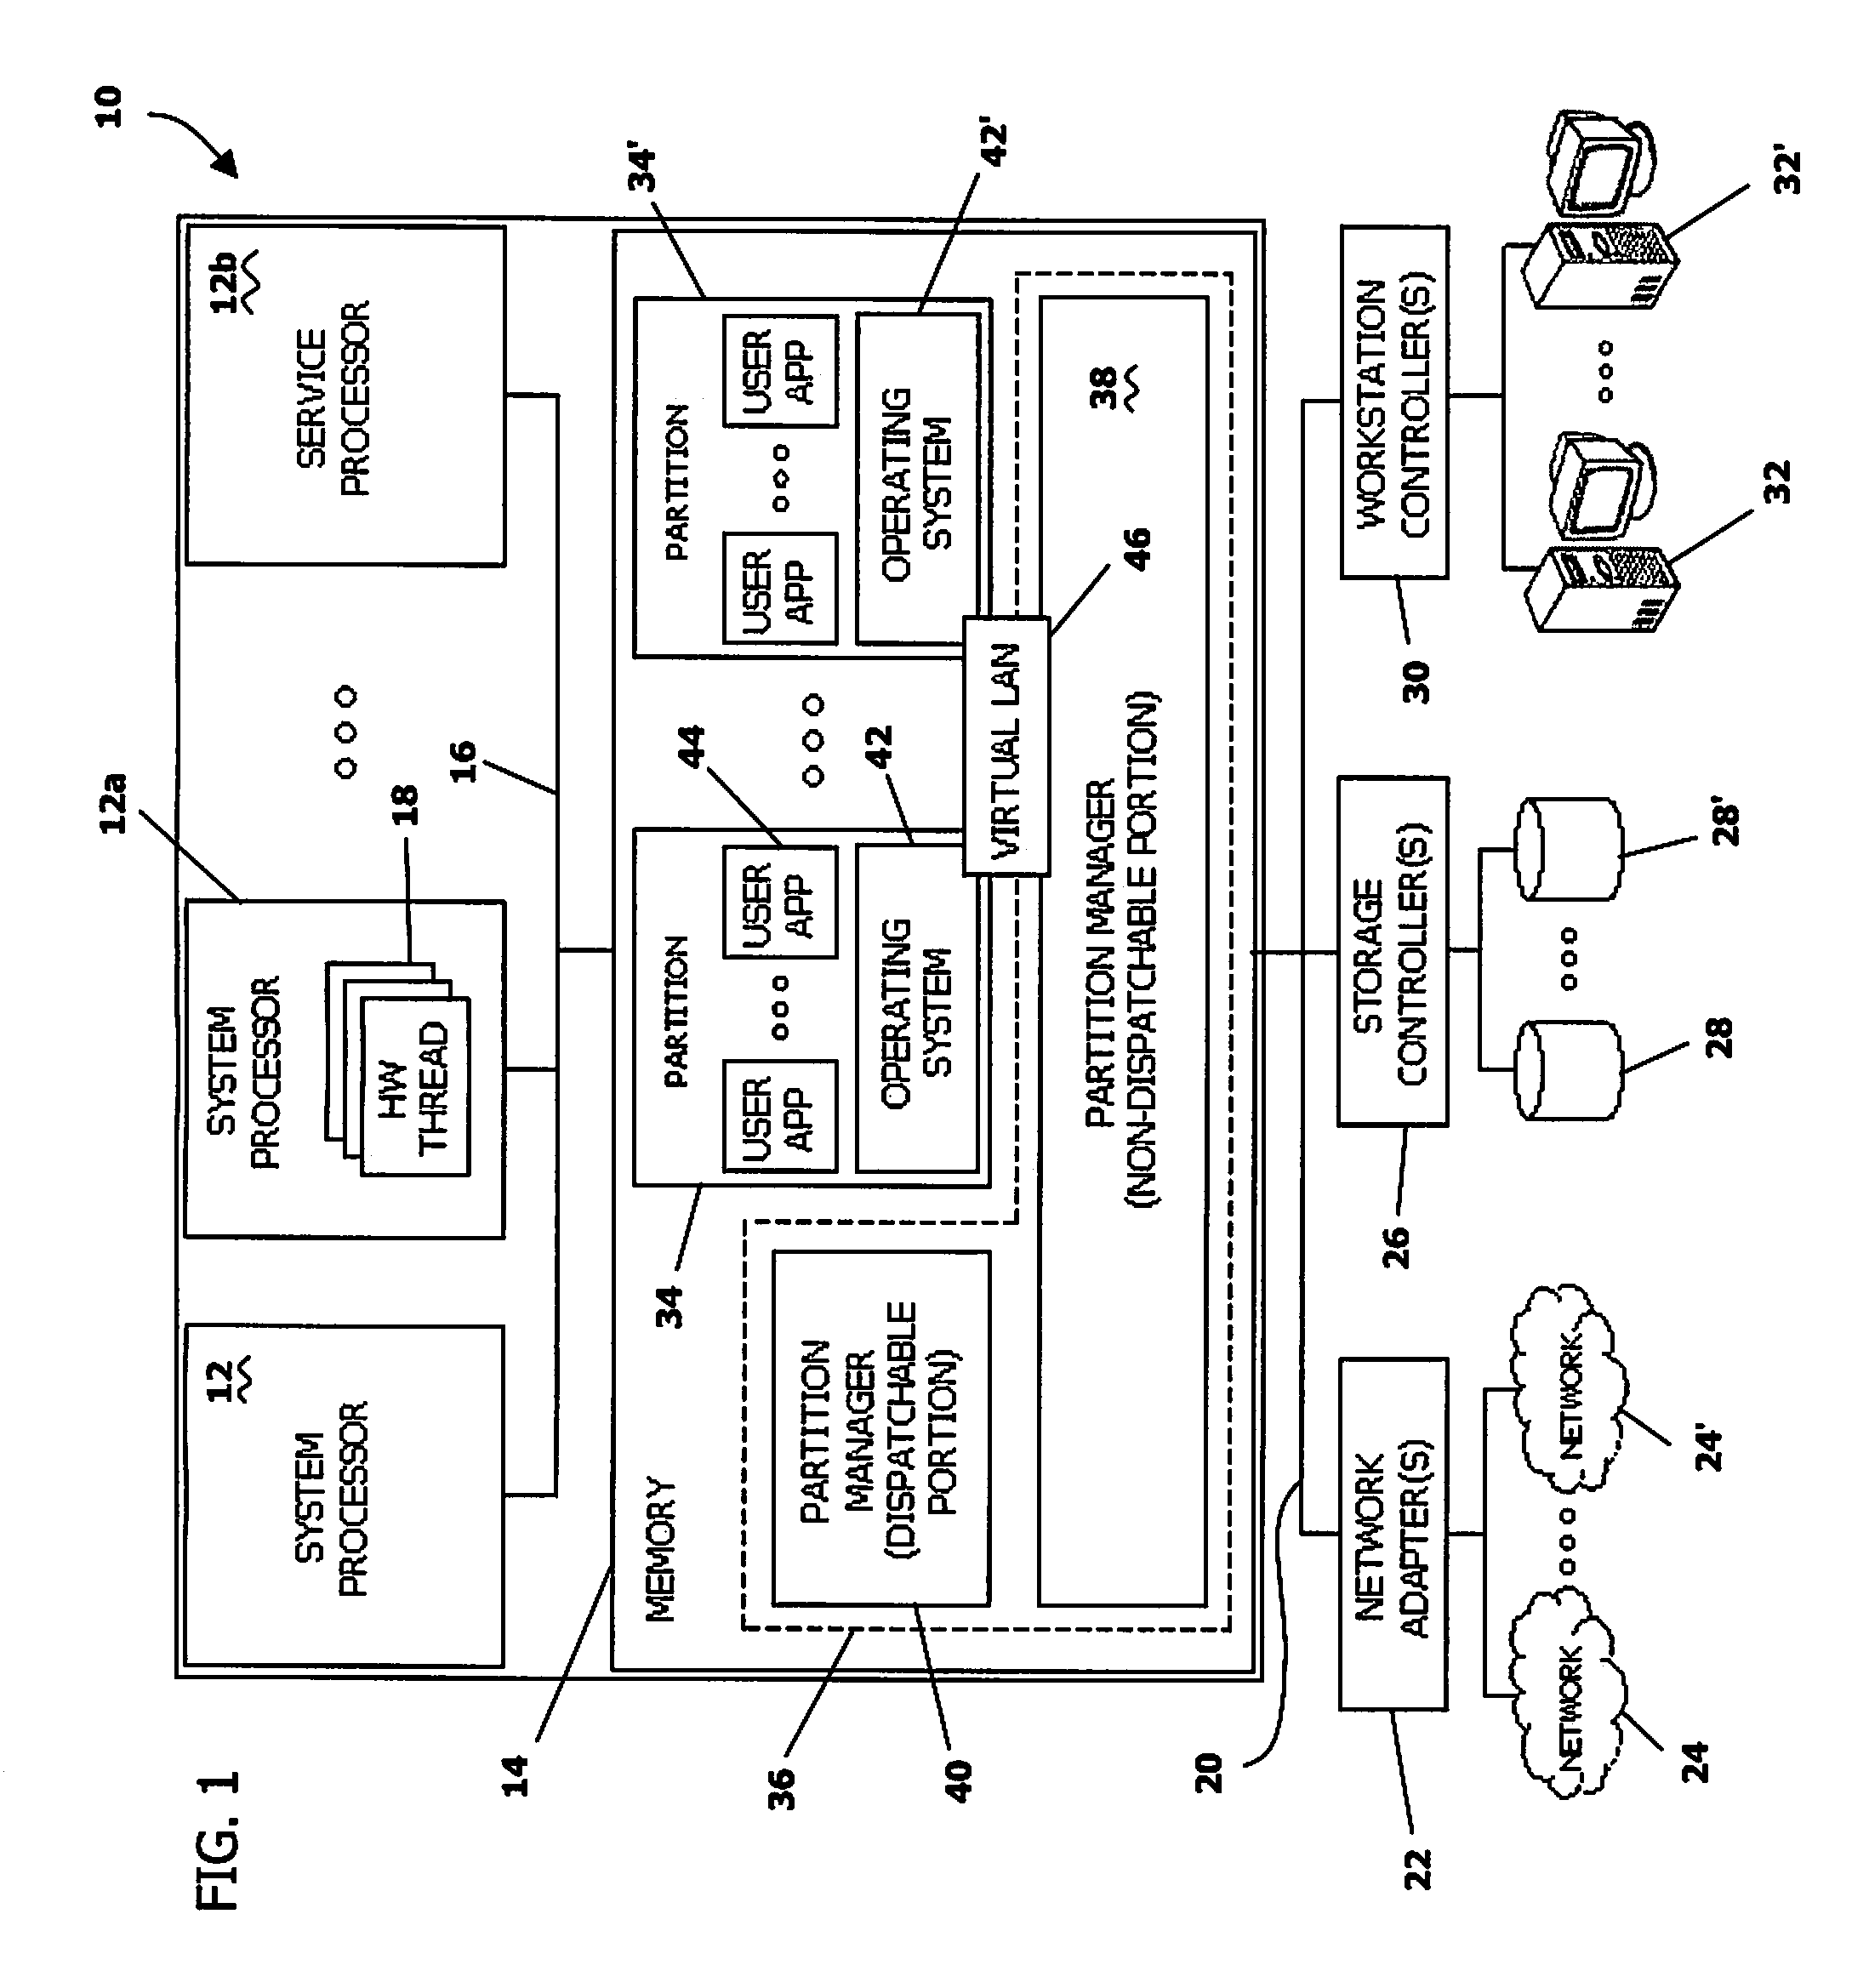 Resource Allocation Based on Anticipated Resource Underutilization in a Logically Partitioned Multi-Processor Environment